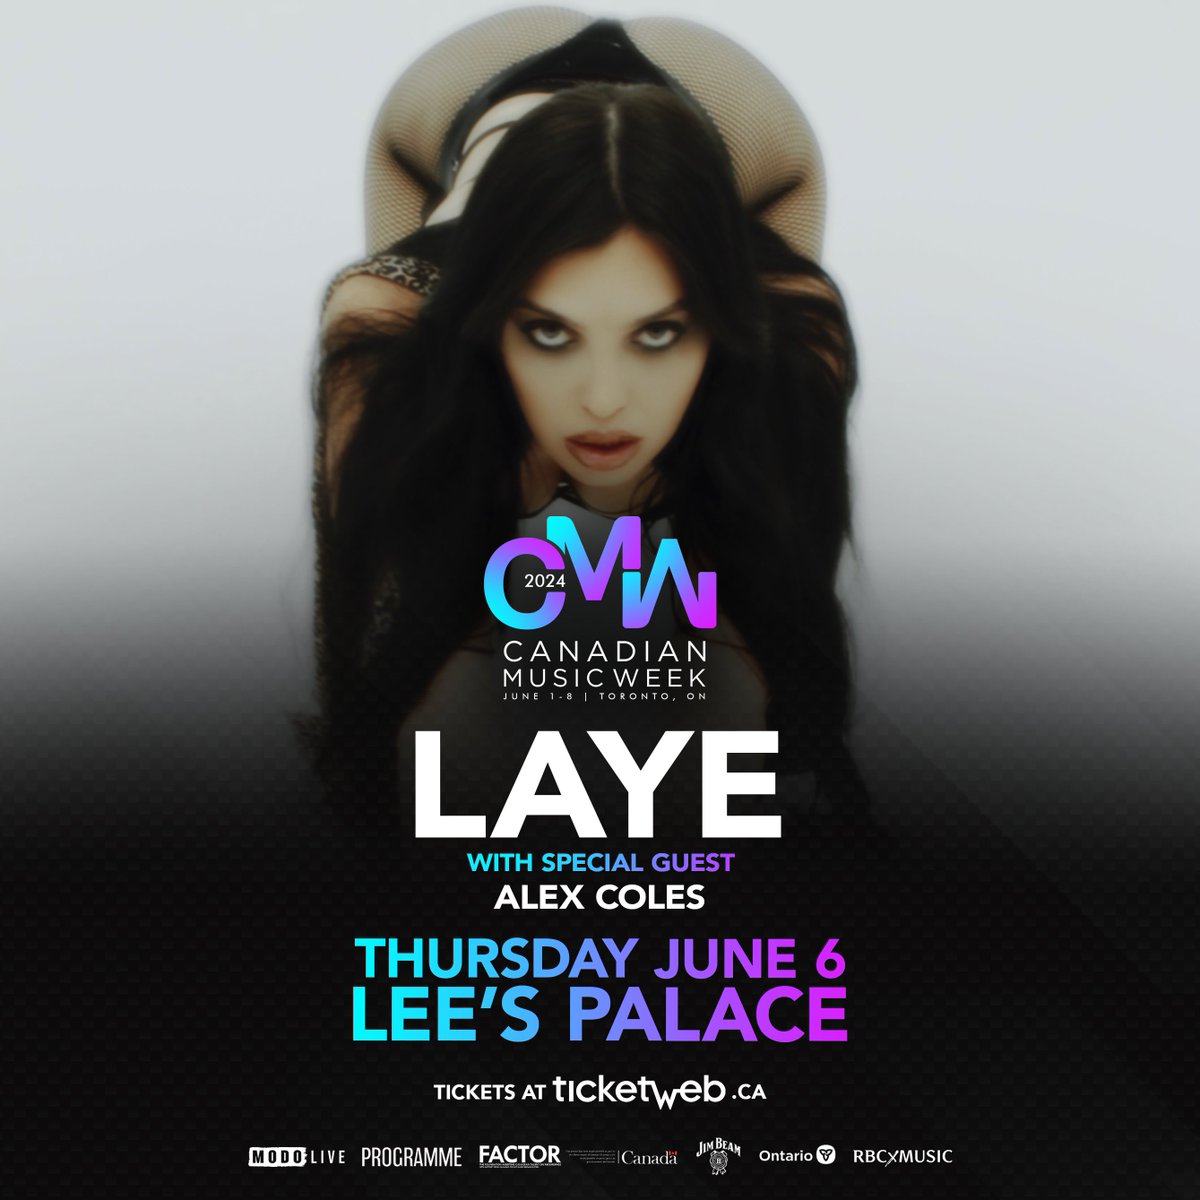 JUST ANNOUNCED✨ @CMW_Week presents @layemusic at @LeesPalaceTO on June 6th. Special guest Alex Coles. Tickets are on-sale now: found.ee/Laye-YYZ 

#laye #leespalace #yyzevents #toronto #CMW2024 #canadianmusicweek